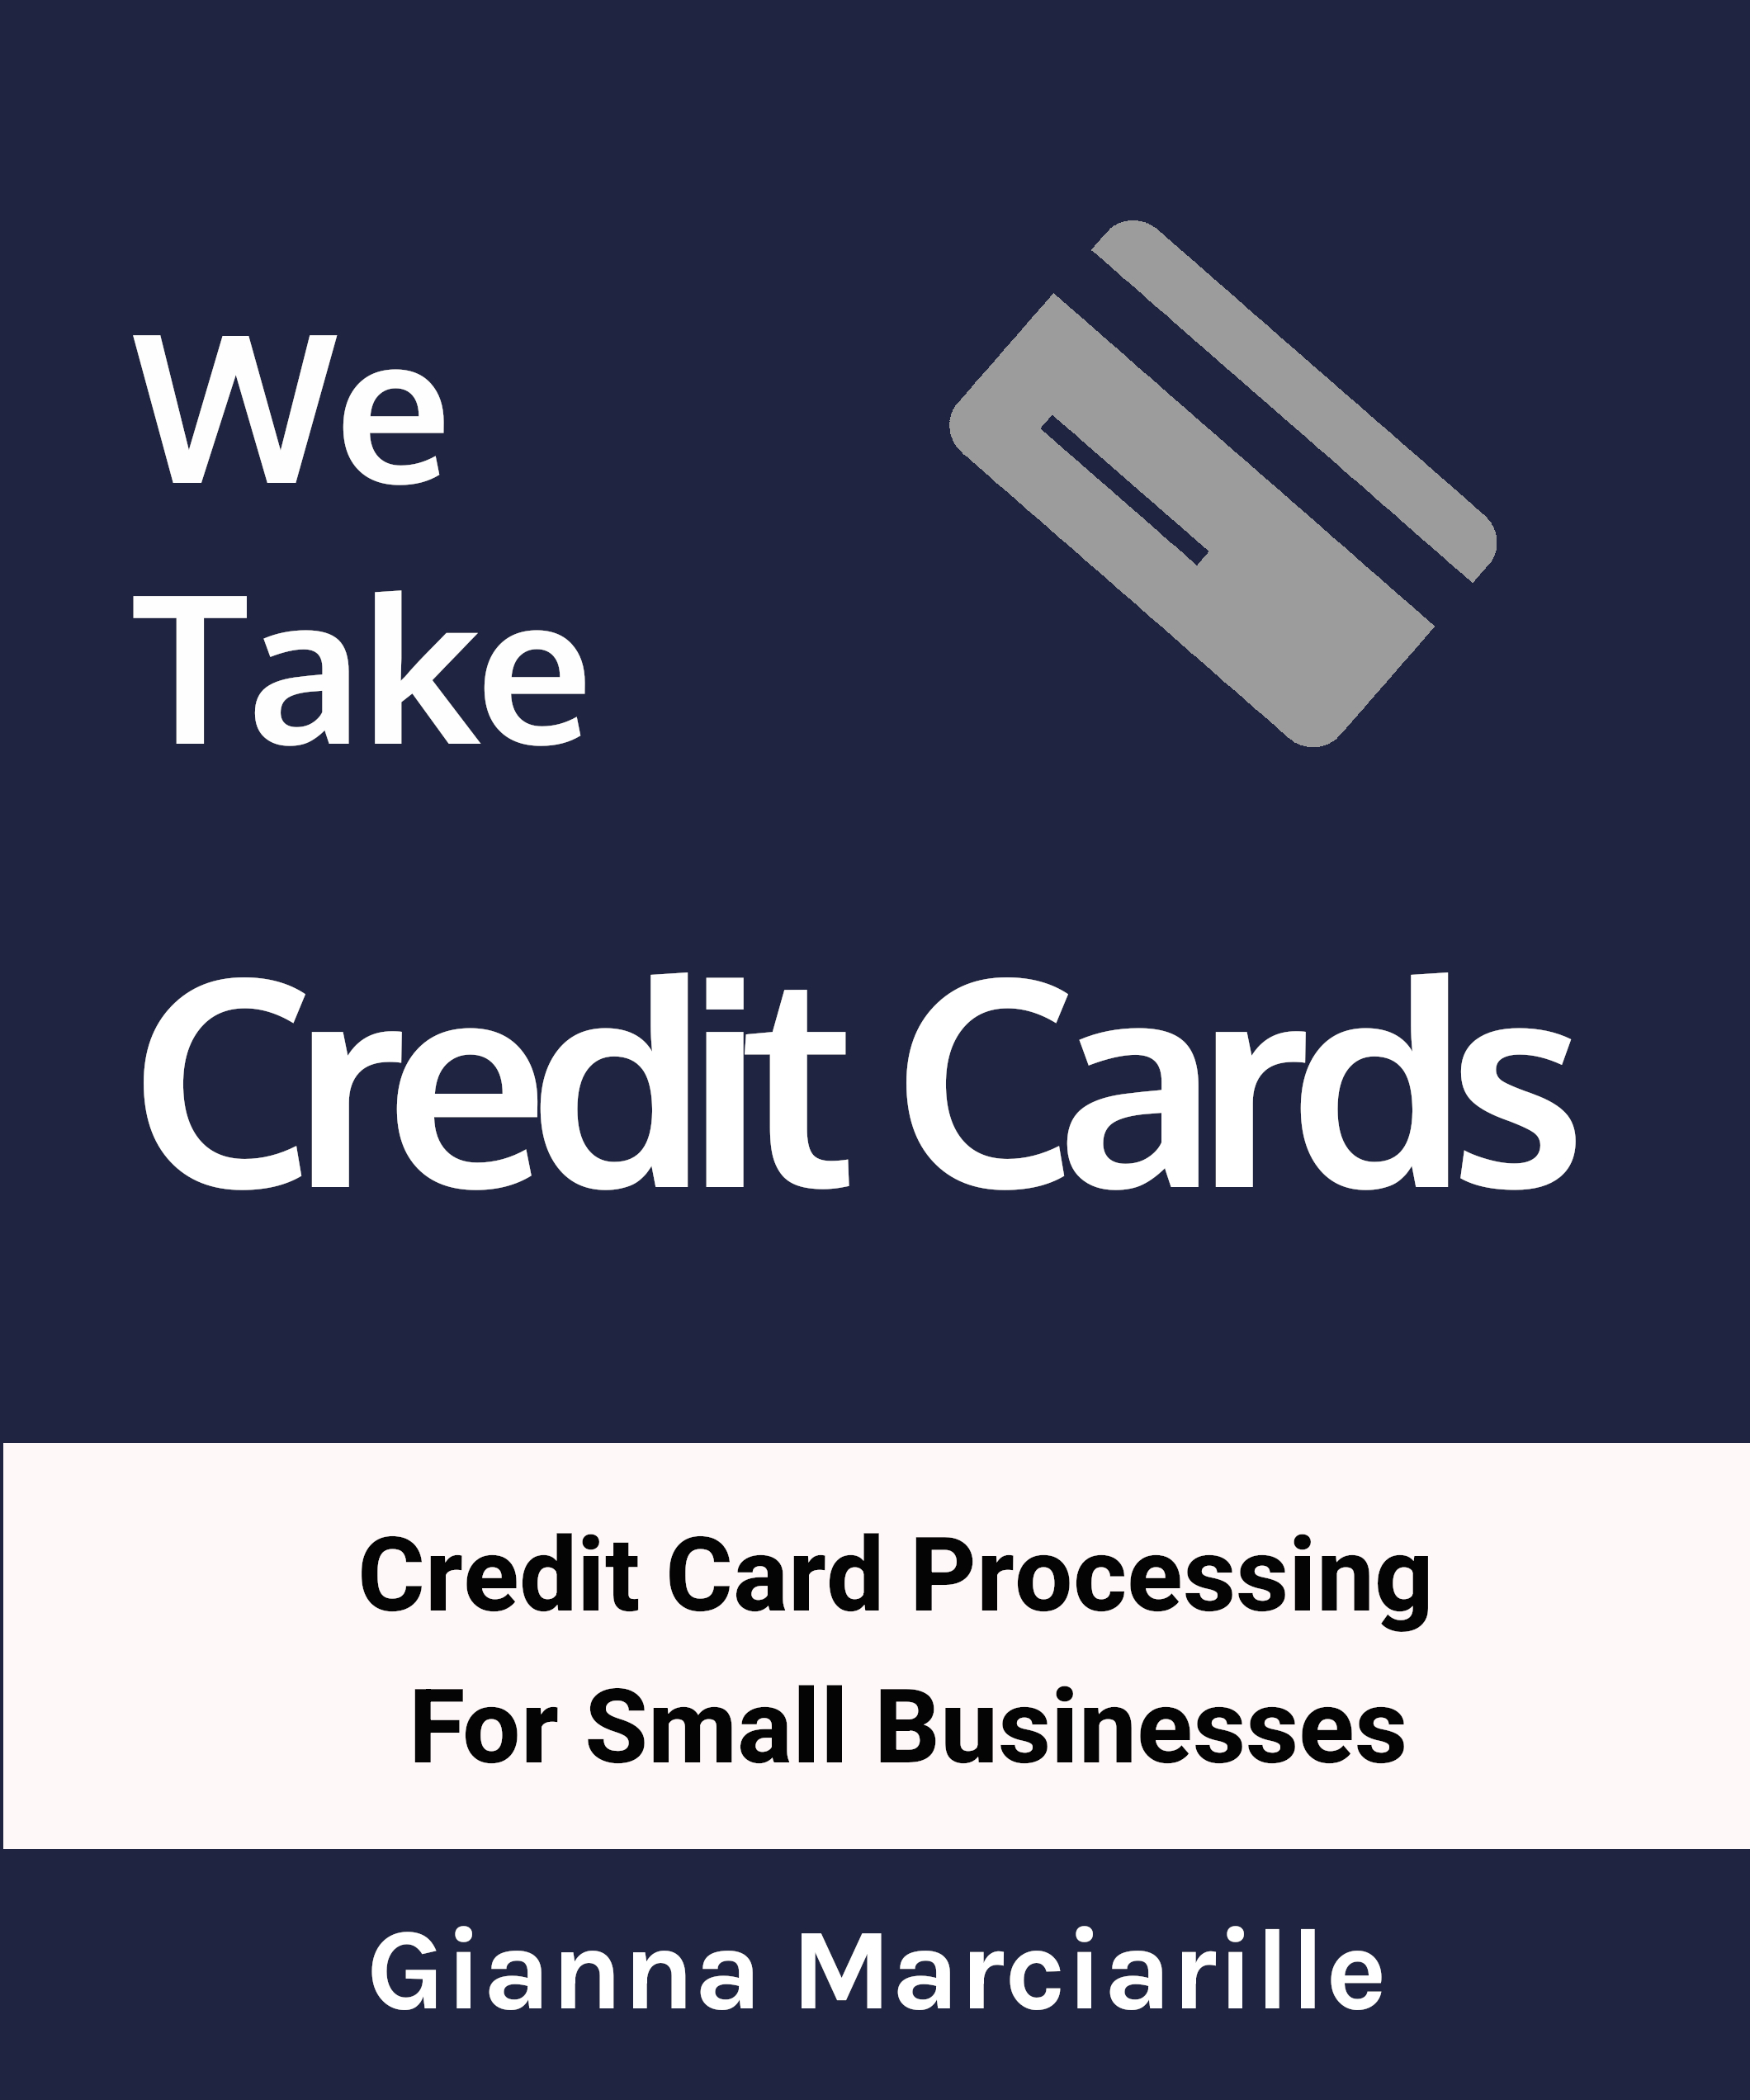 FREE: We Take Credit Cards: Credit Card Processing for Small Businesses by Gianna Marciarille